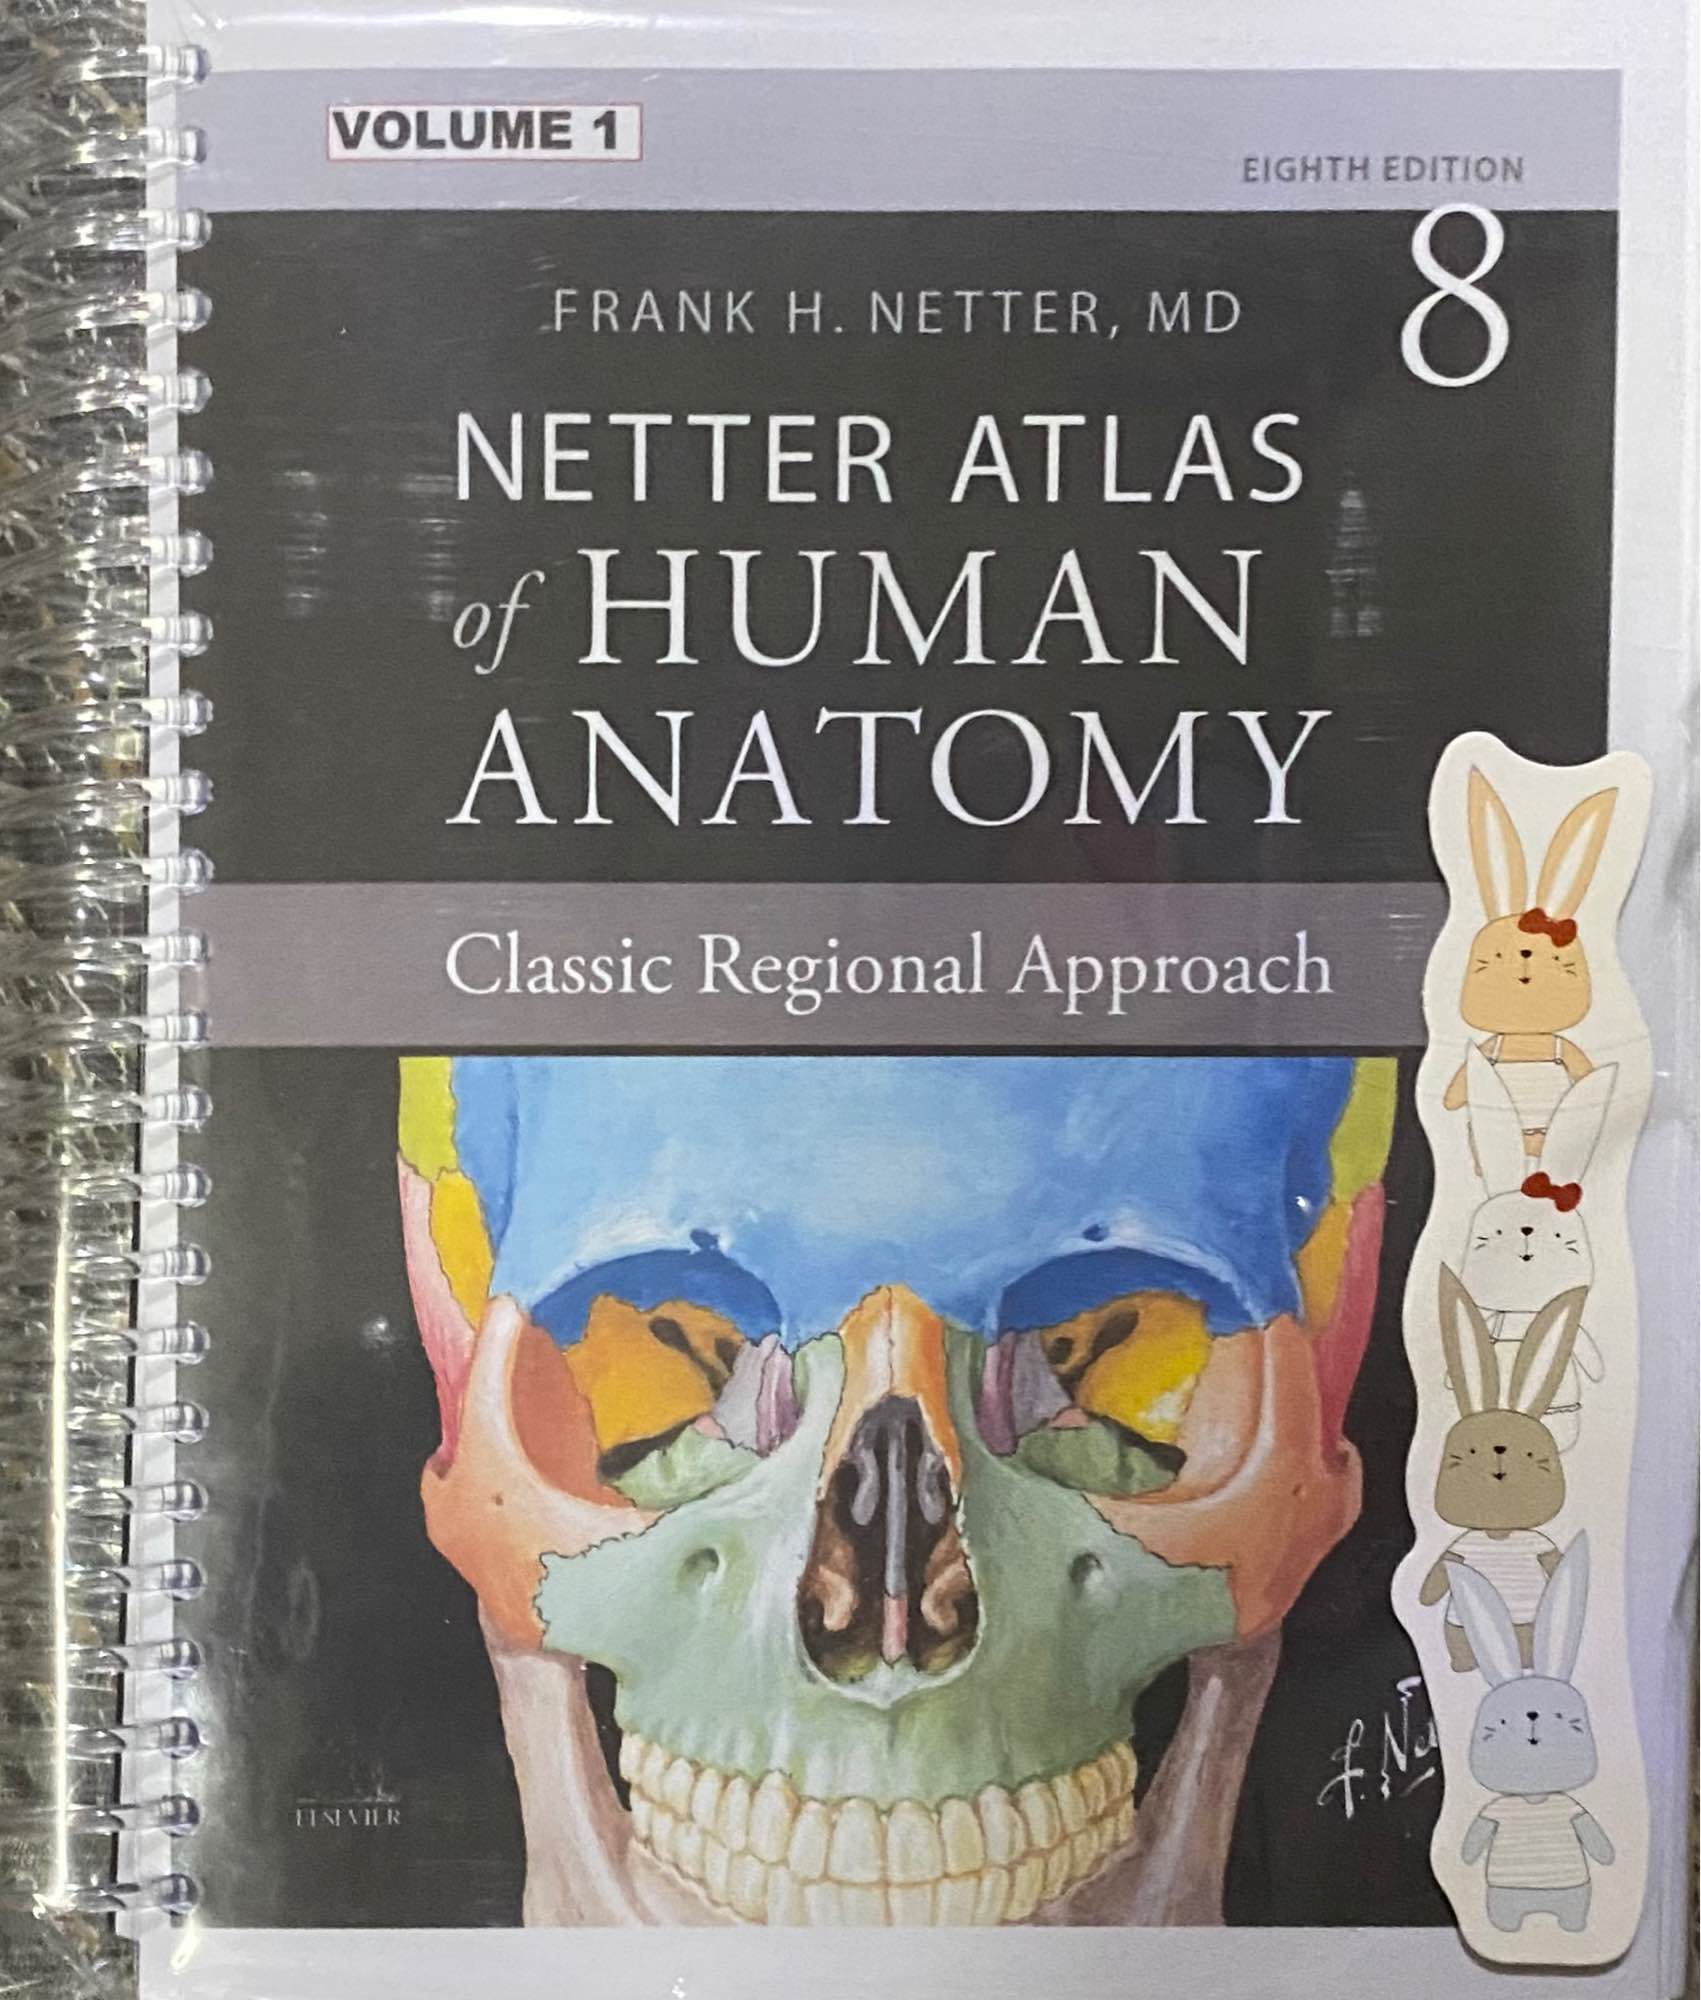 Atlas　Human　Anatomy　Lazada　Coloring　Netter's　Latest　Book　Anatomy　Anatomy　Textbook　Flashcards　of　Edition　PH　Netter's　Netter